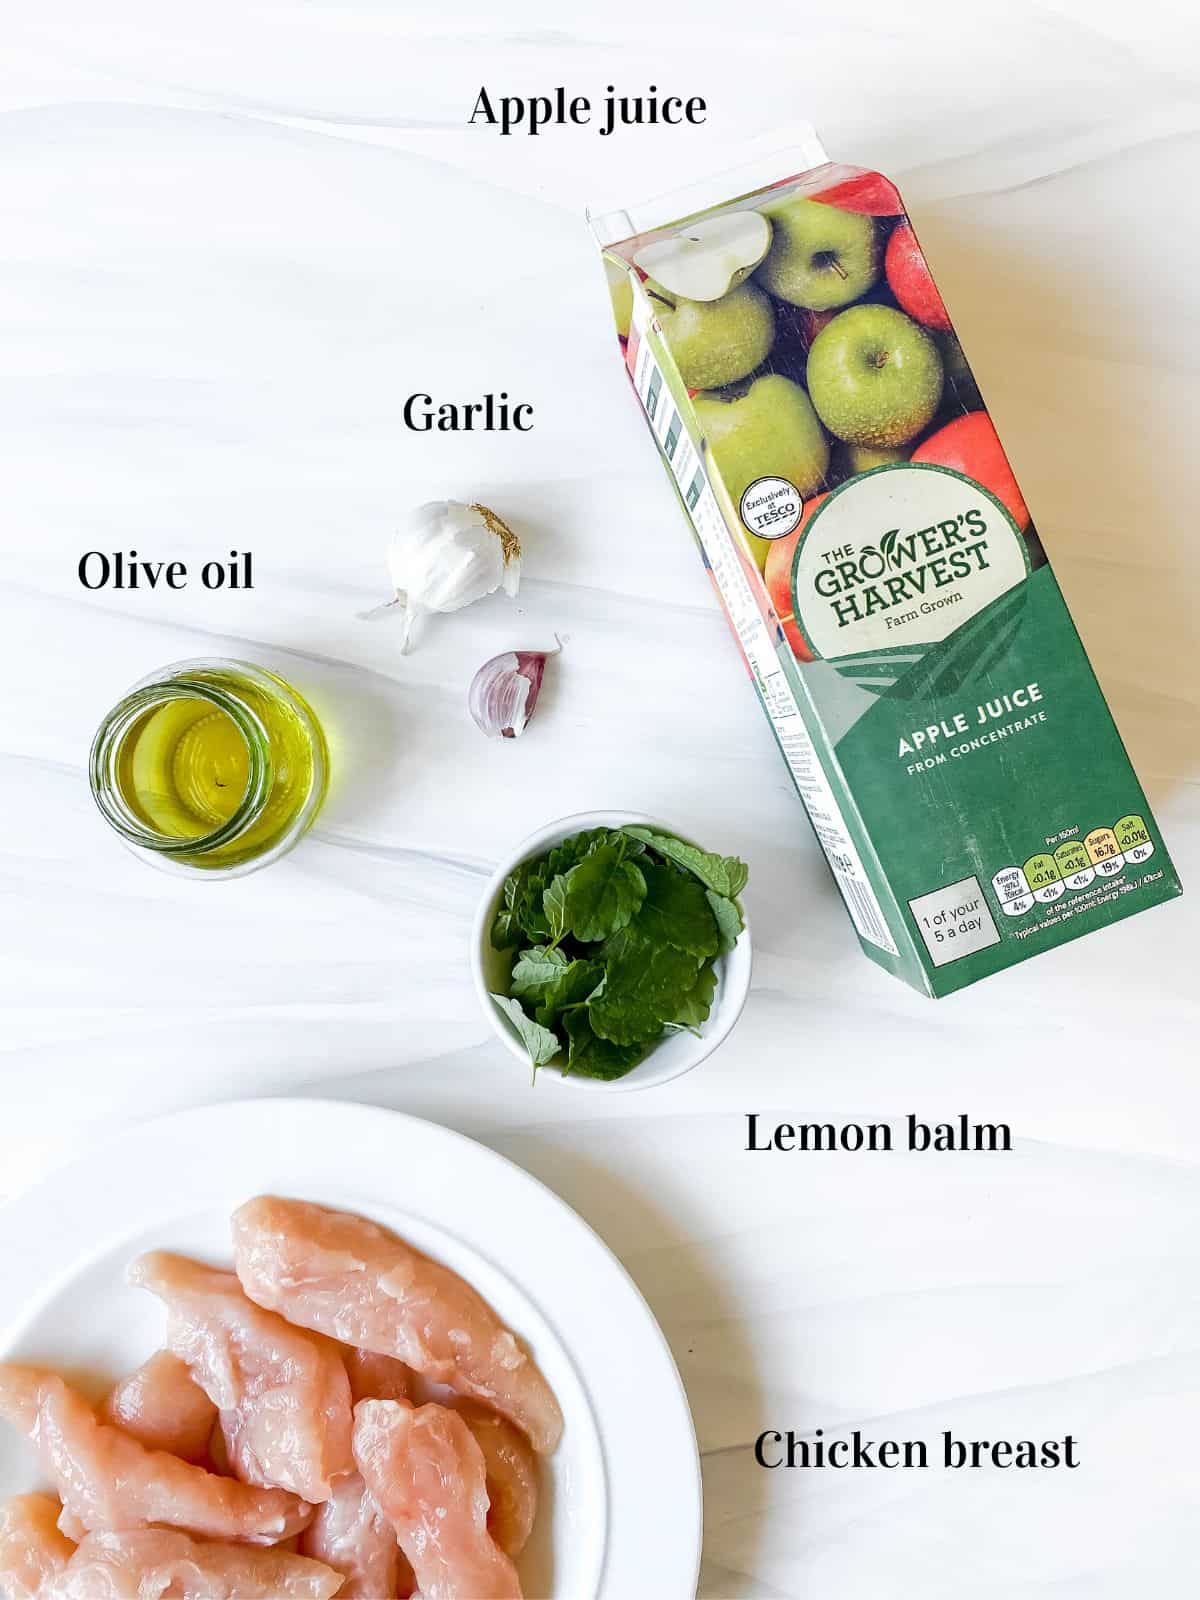 individually labelled ingredients to make lemon balm chicken including olive oil, garlic and apple juice.